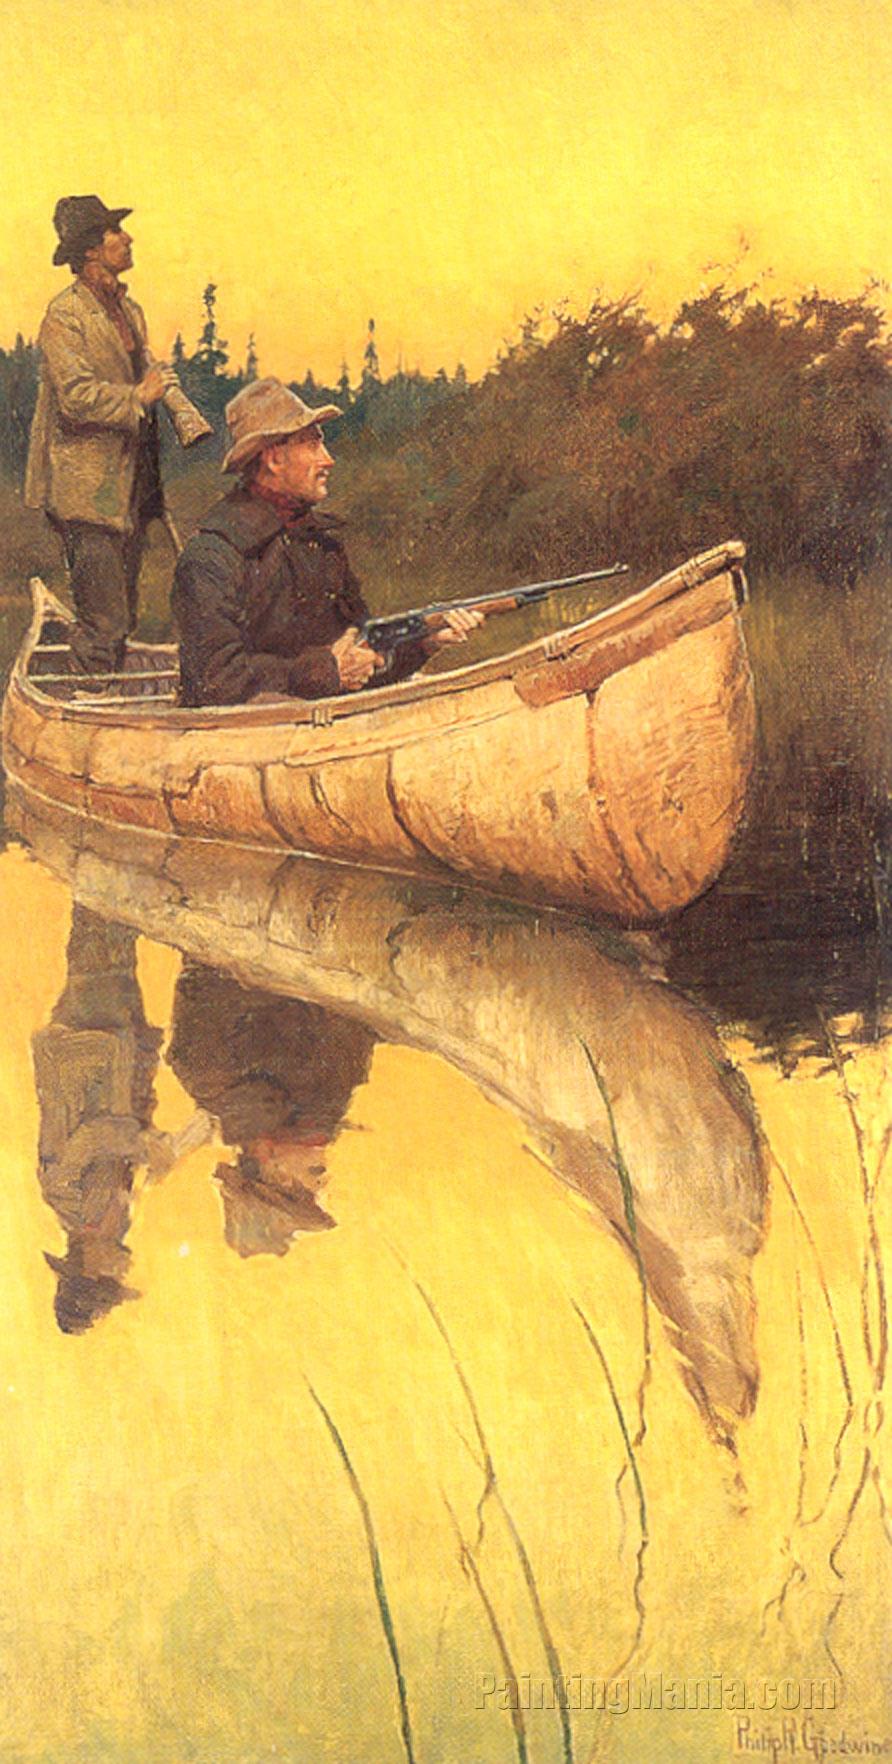 An Indian Guide with moose call and a Hunter with Rifle at the Ready in a Birch Bark Canoe